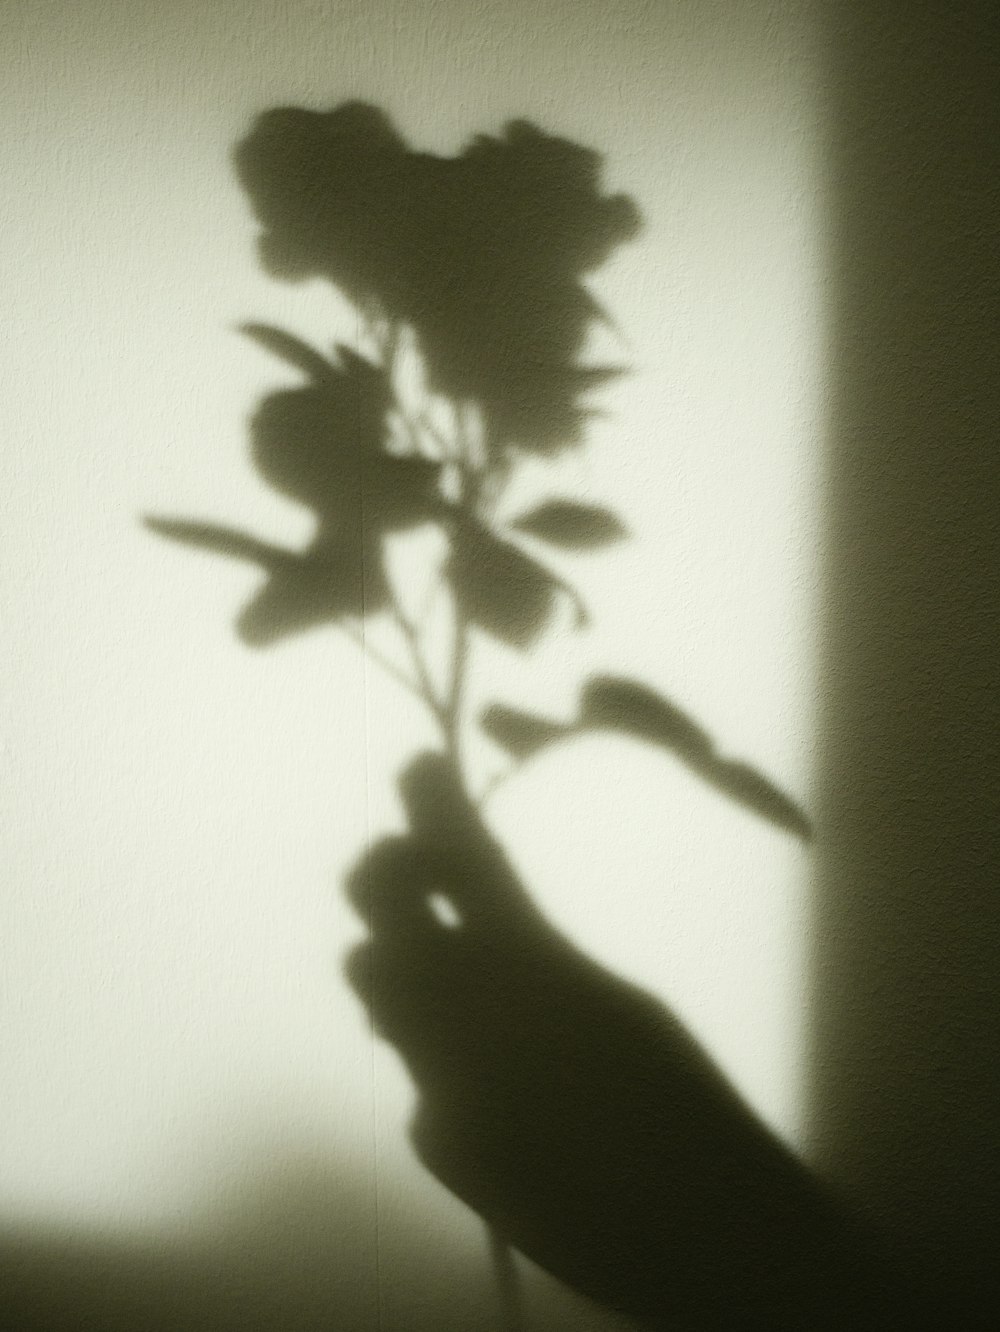 a shadow of a person's hand holding a flower